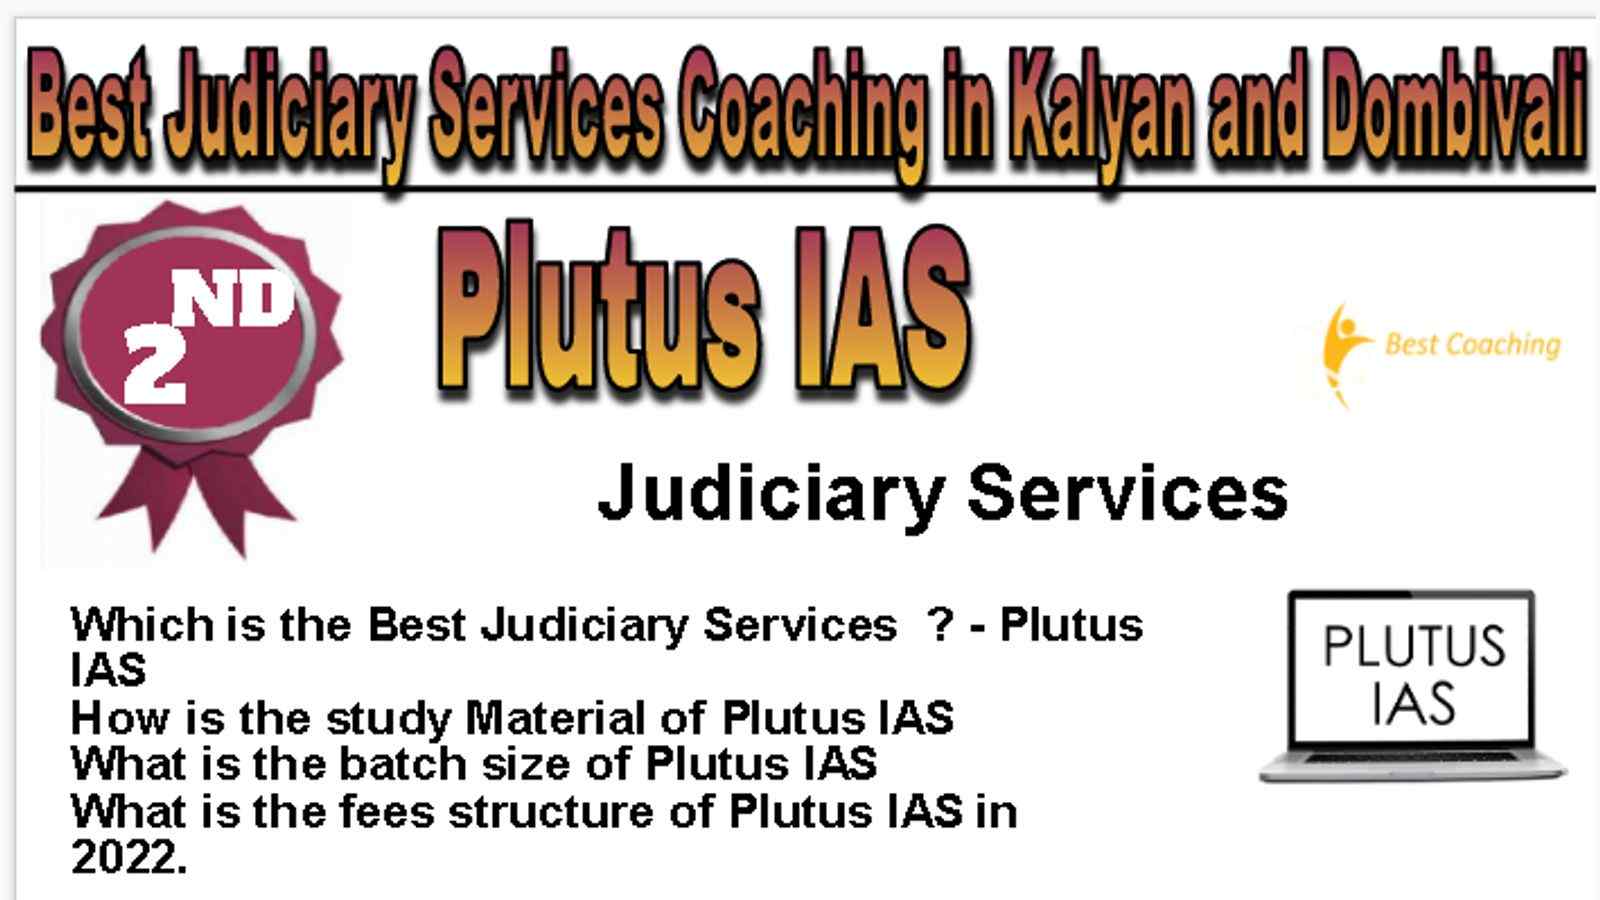 Rank 2 Best Judiciary Services Coaching in Kalyan and Dombivali